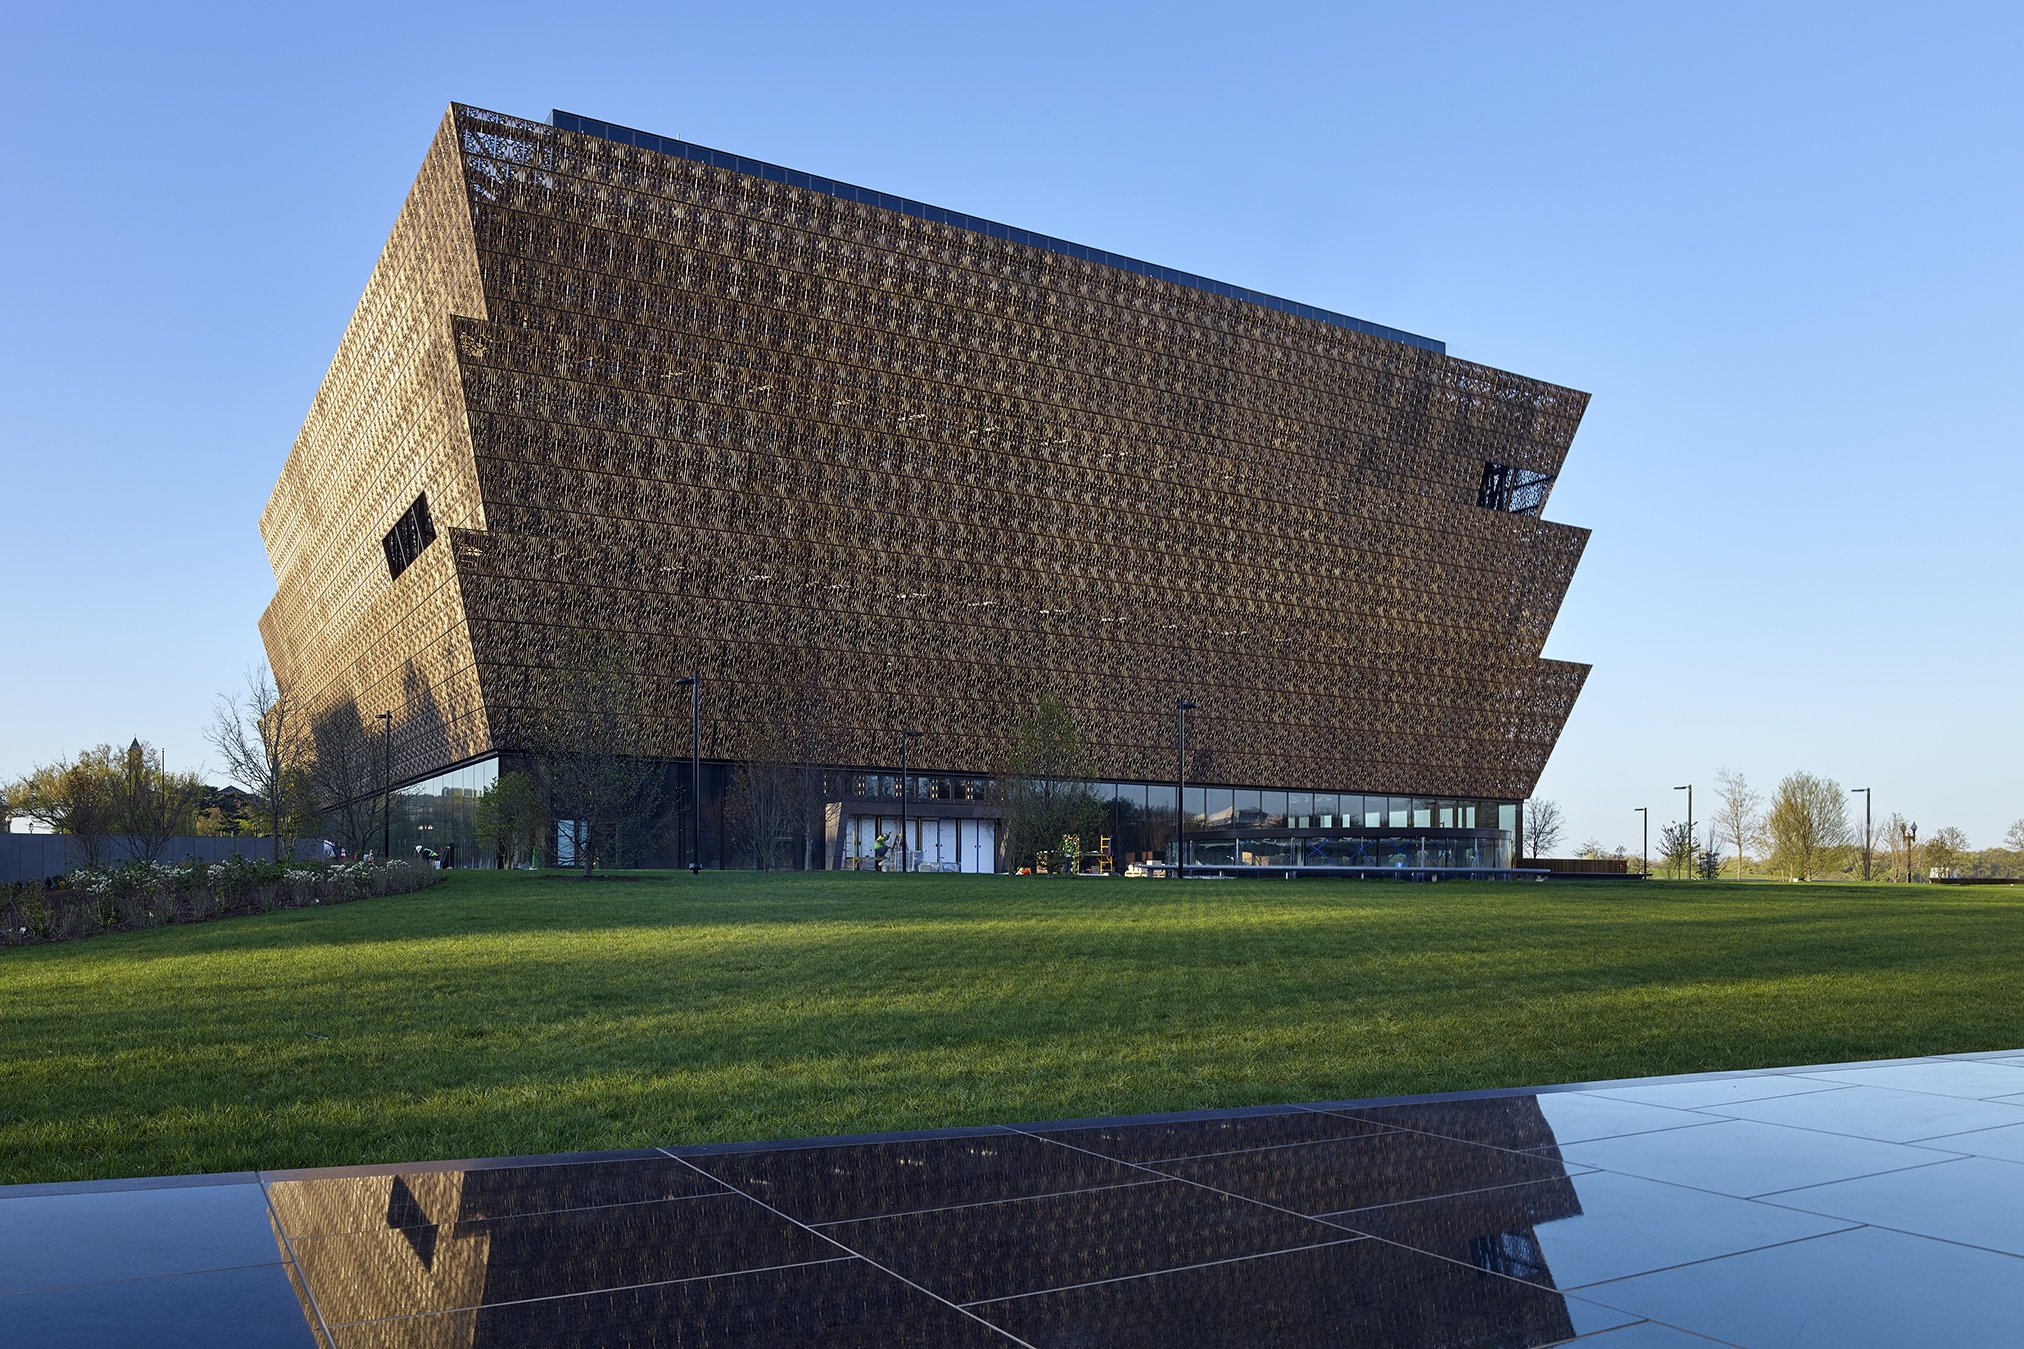  Smithsonian Institution, National Museum of African American History and Culture Architectural Photrography 